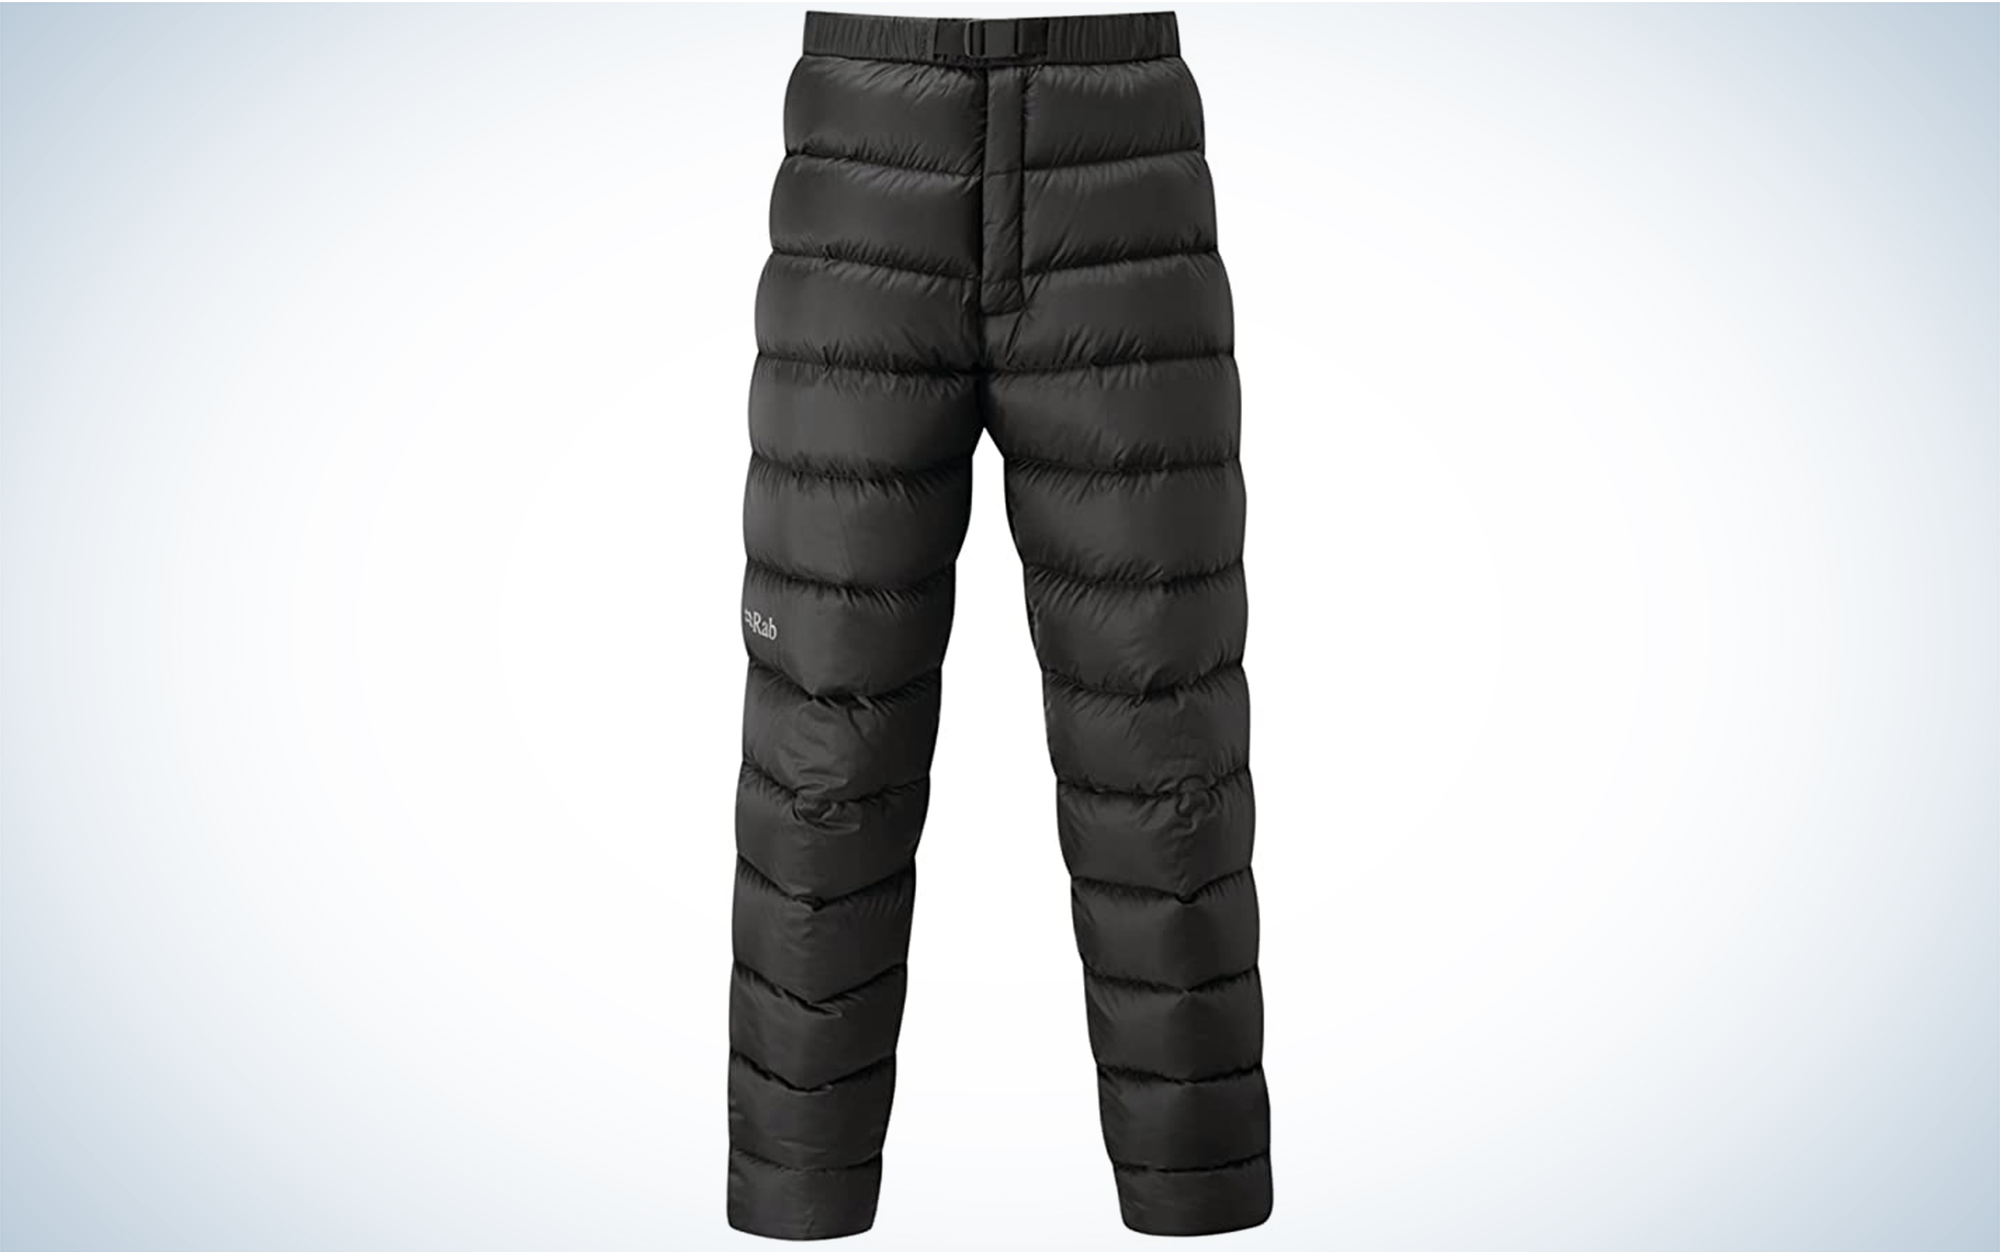 The Rab Argon Down Pants are the best puffer pants for winter.